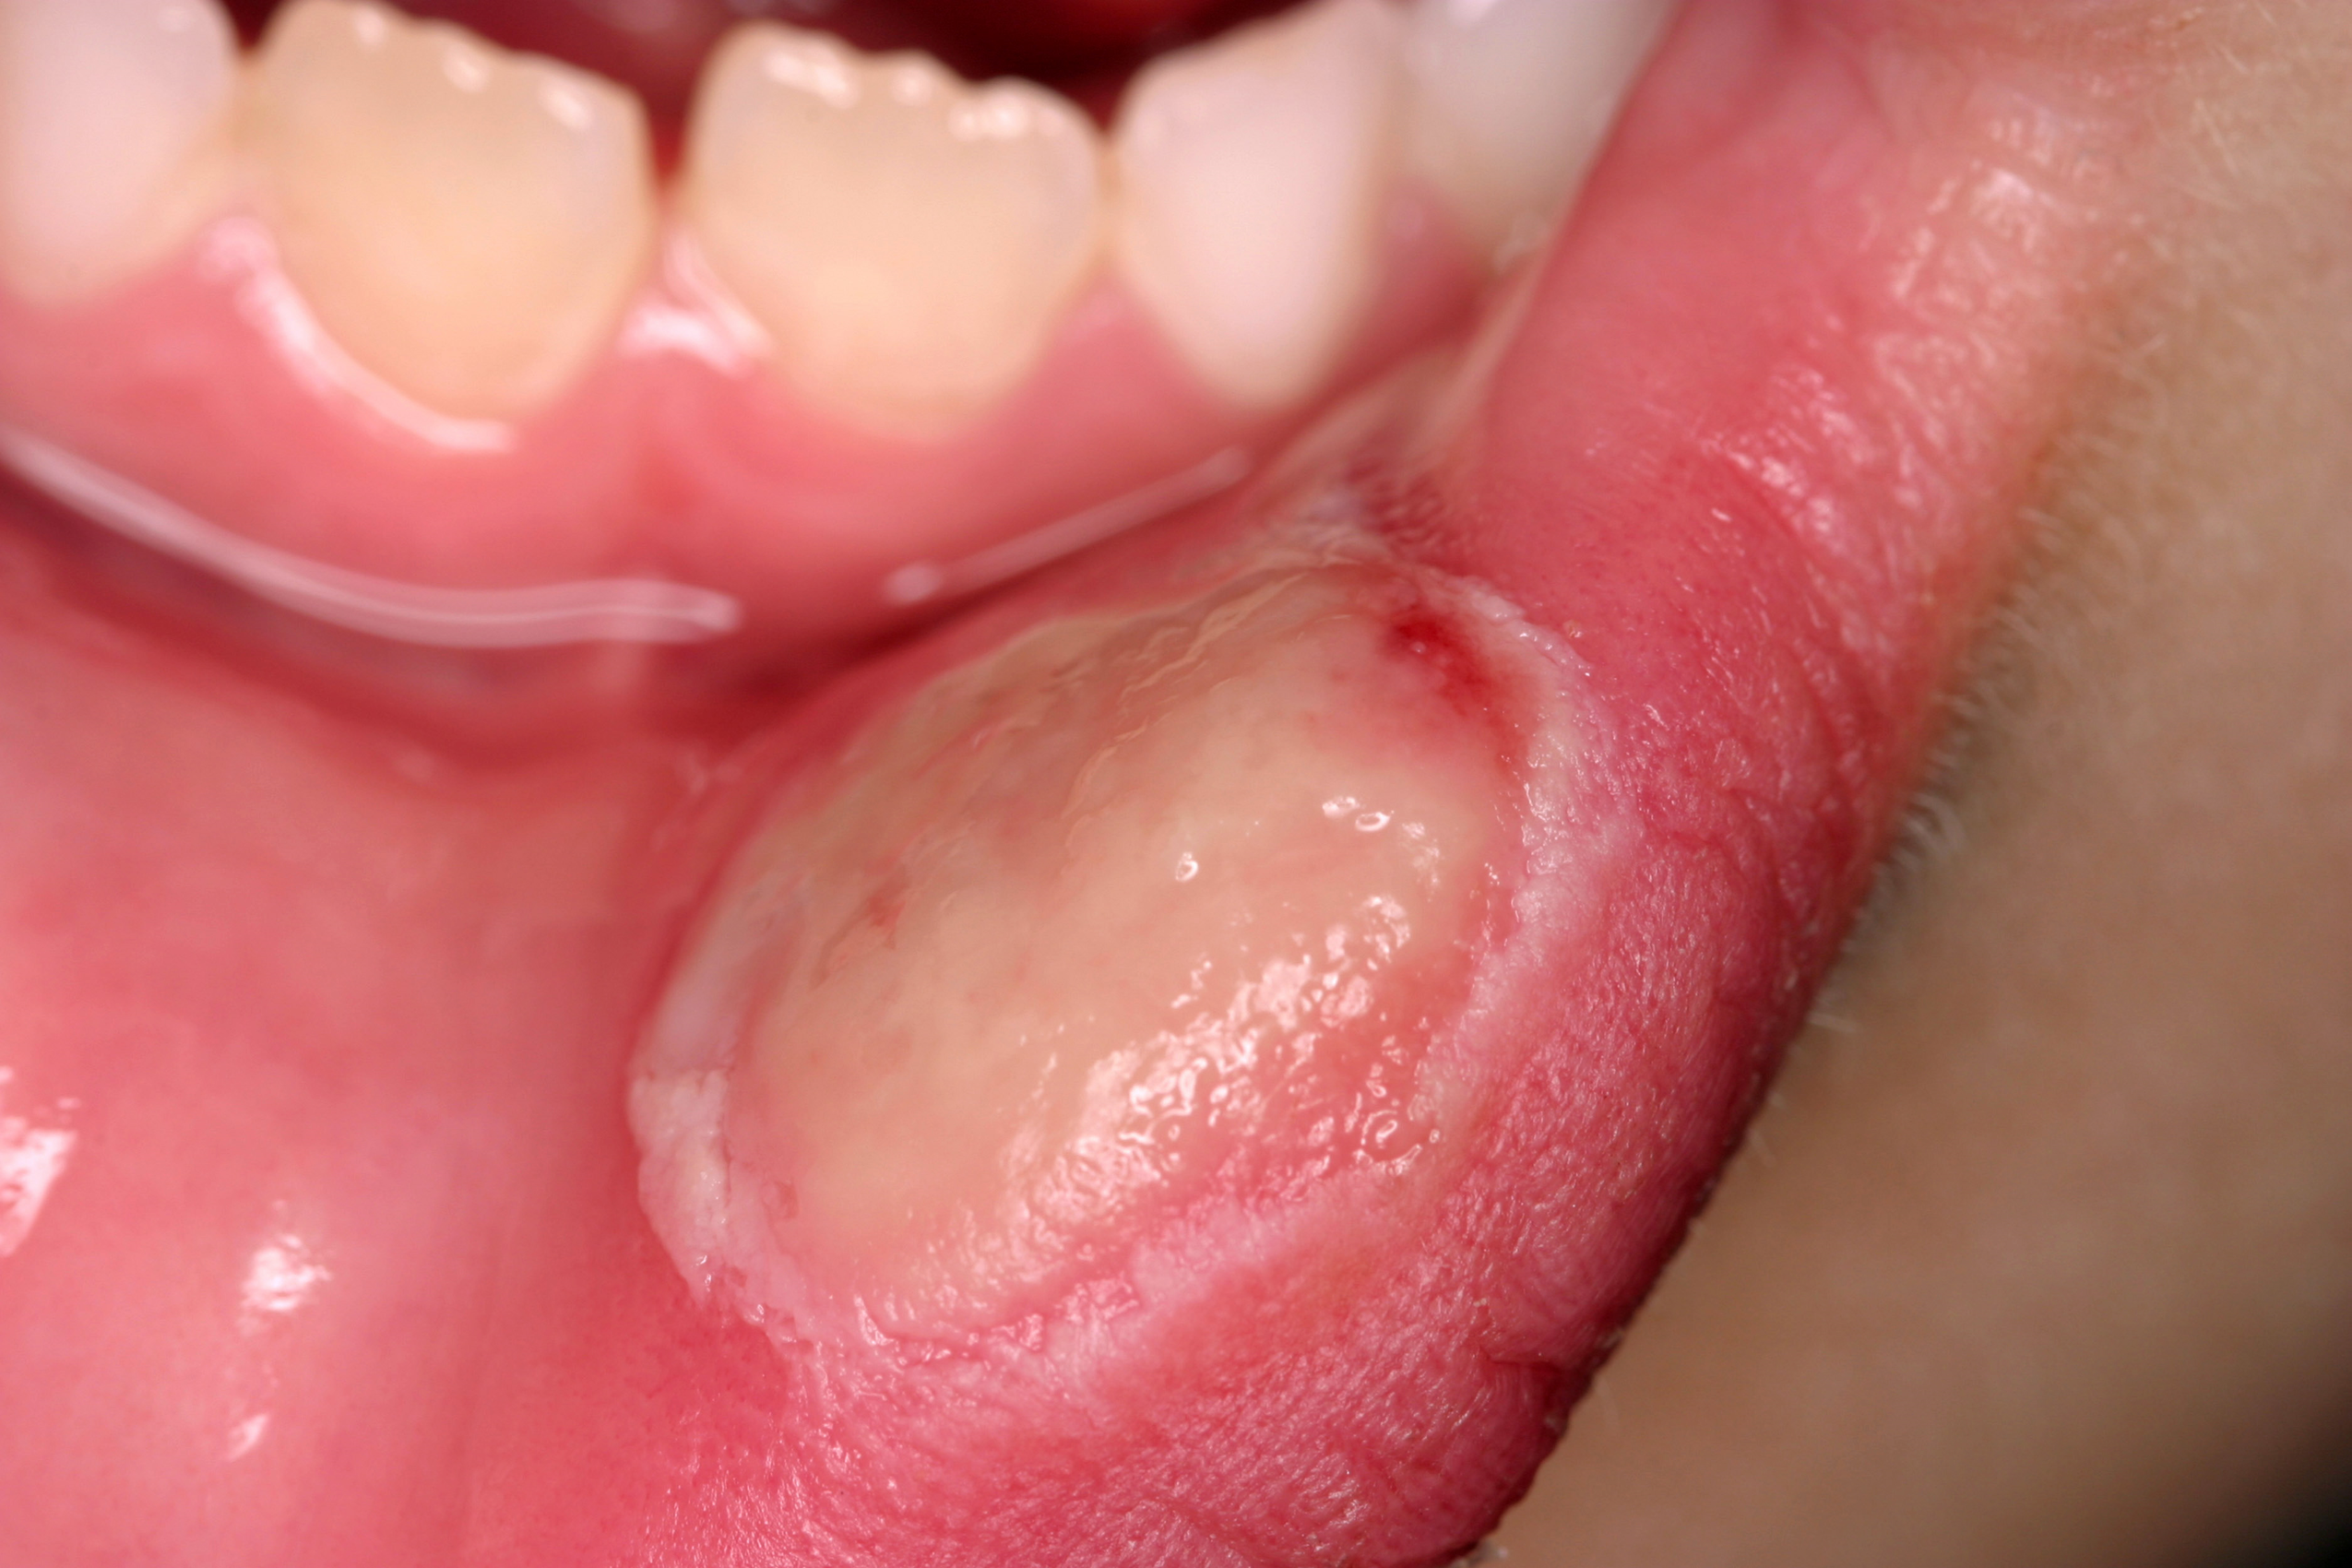 Warts and mouth sores, Hpv and mouth blisters, Hpv tongue ulcers